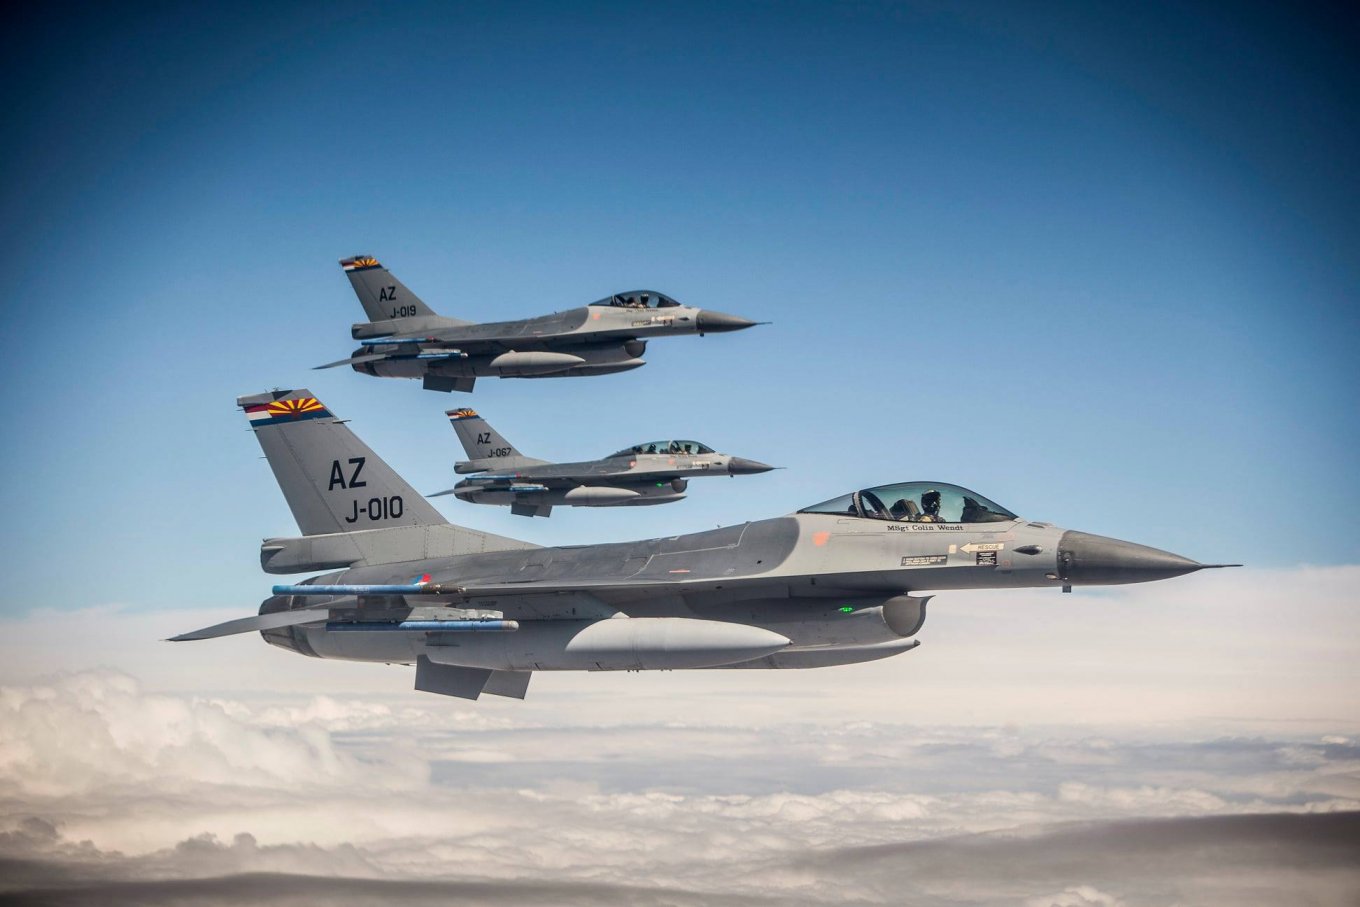 F-16 of The Royal Netherlands Air Force, Defense Express, The F-16 Delivery Rate to Ukraine Announced as Well As Whether the Country Will Have Swedish Gripen, Defense Express